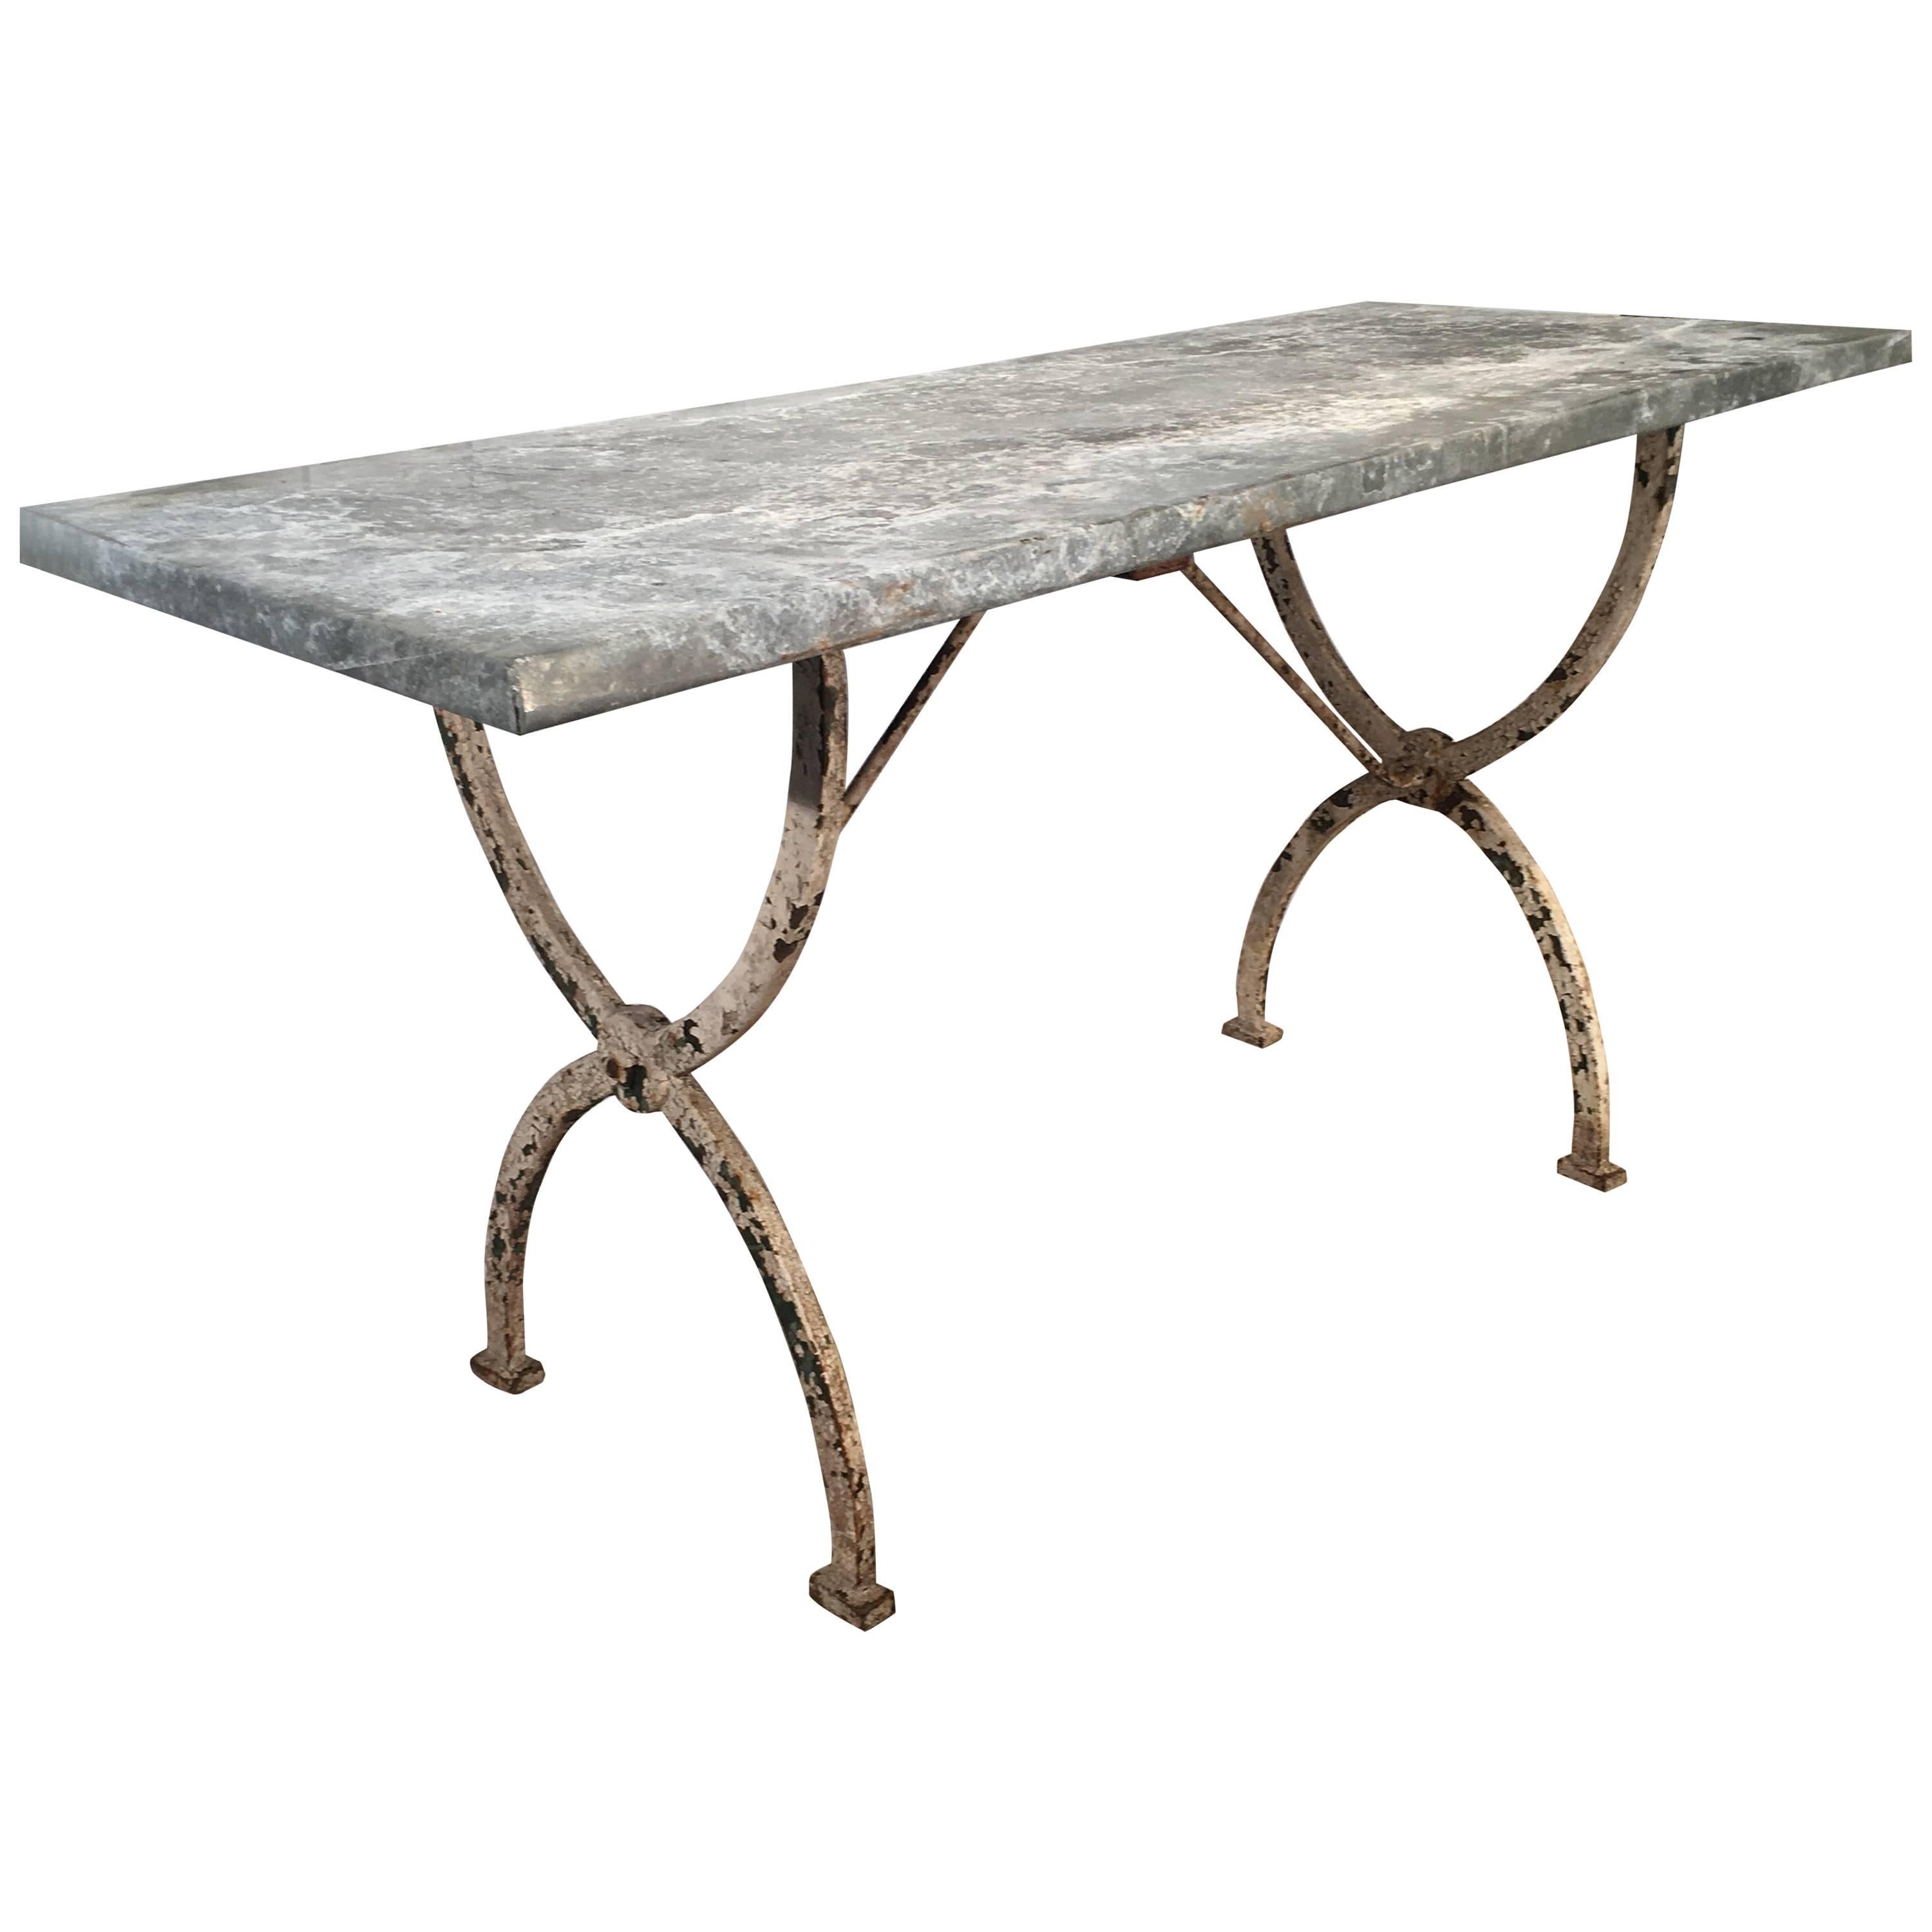 French Rectangular Wrought Iron Zinc-Topped Table #1